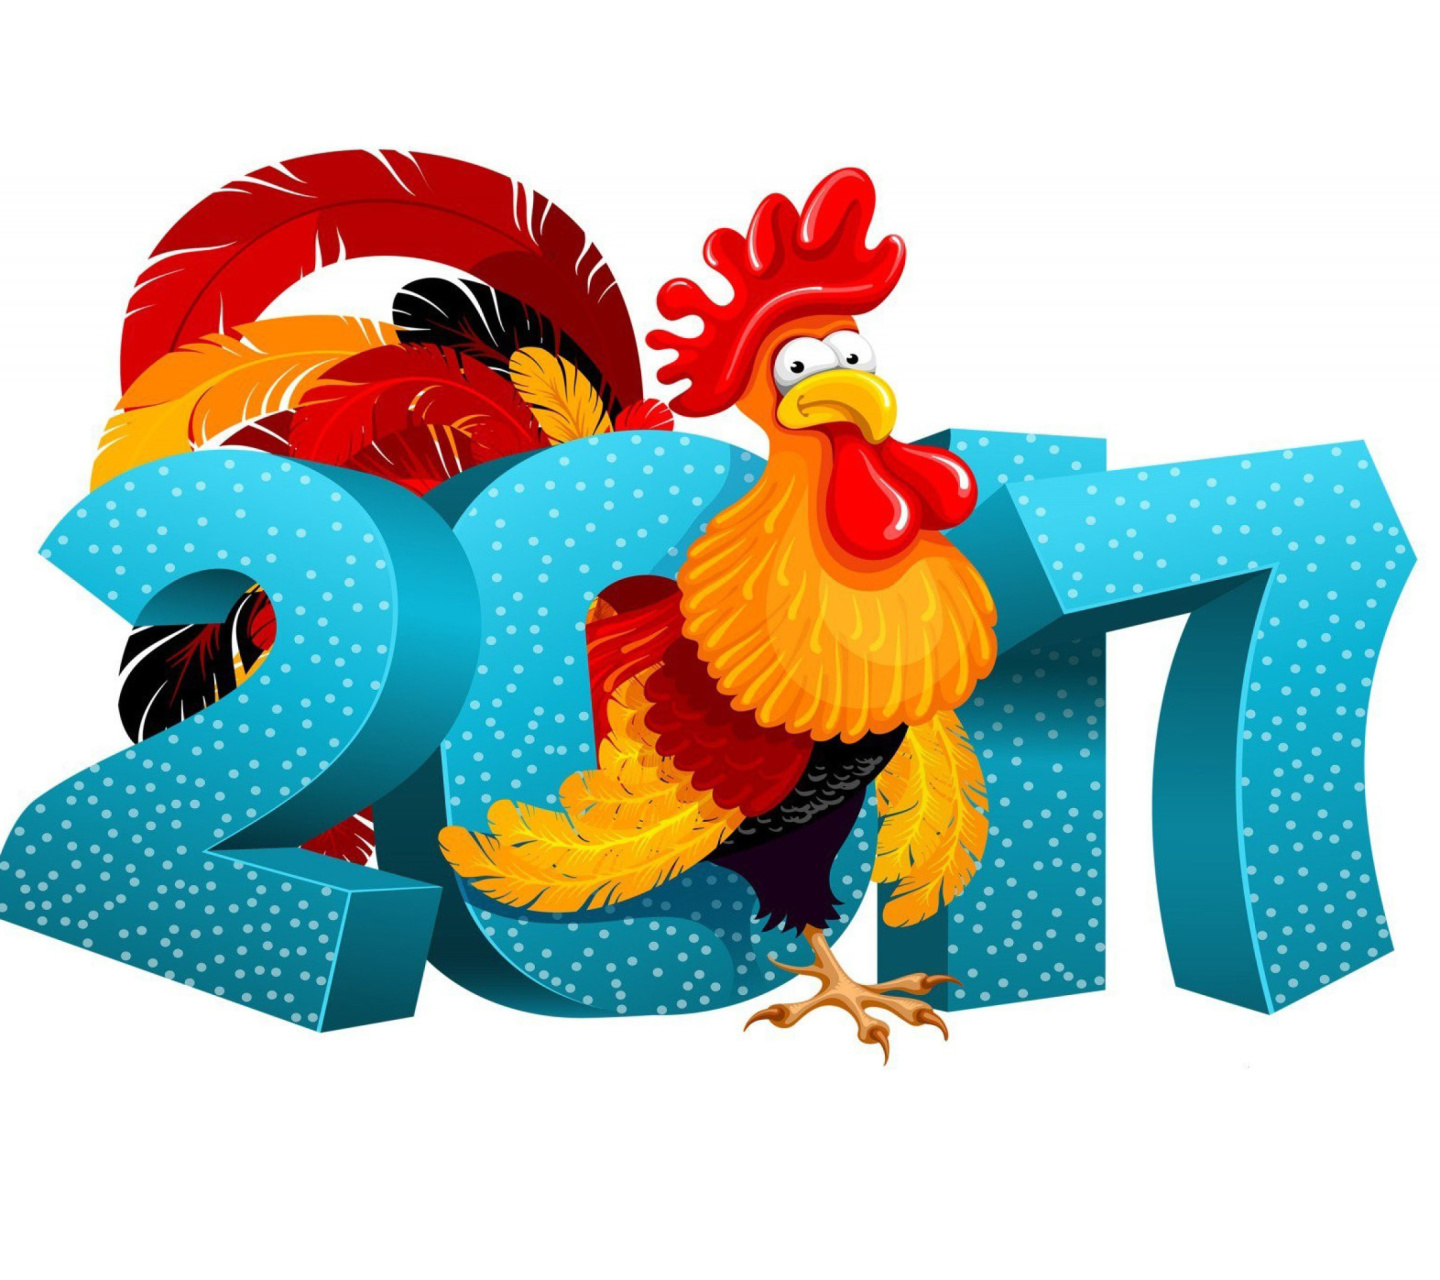 Das 2017 New Year Chinese Horoscope Red Cock Rooster Wallpaper 1440x1280